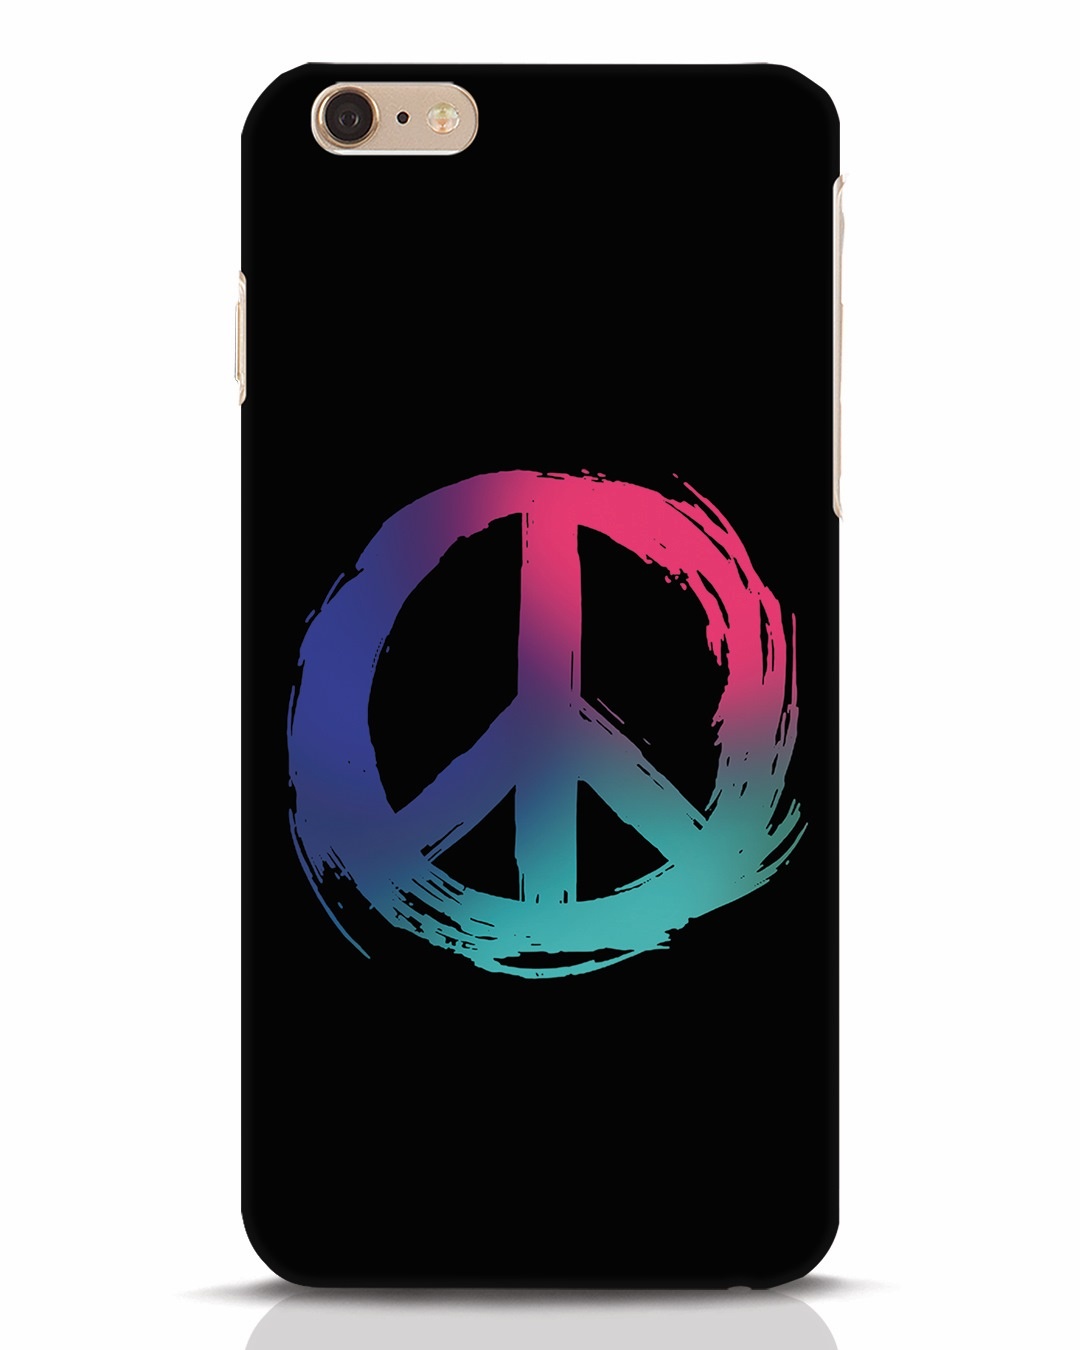 Colors Of Peace iPhone 6s Plus Mobile Cover iPhone 6s Plus Mobile Covers Bewakoof.com